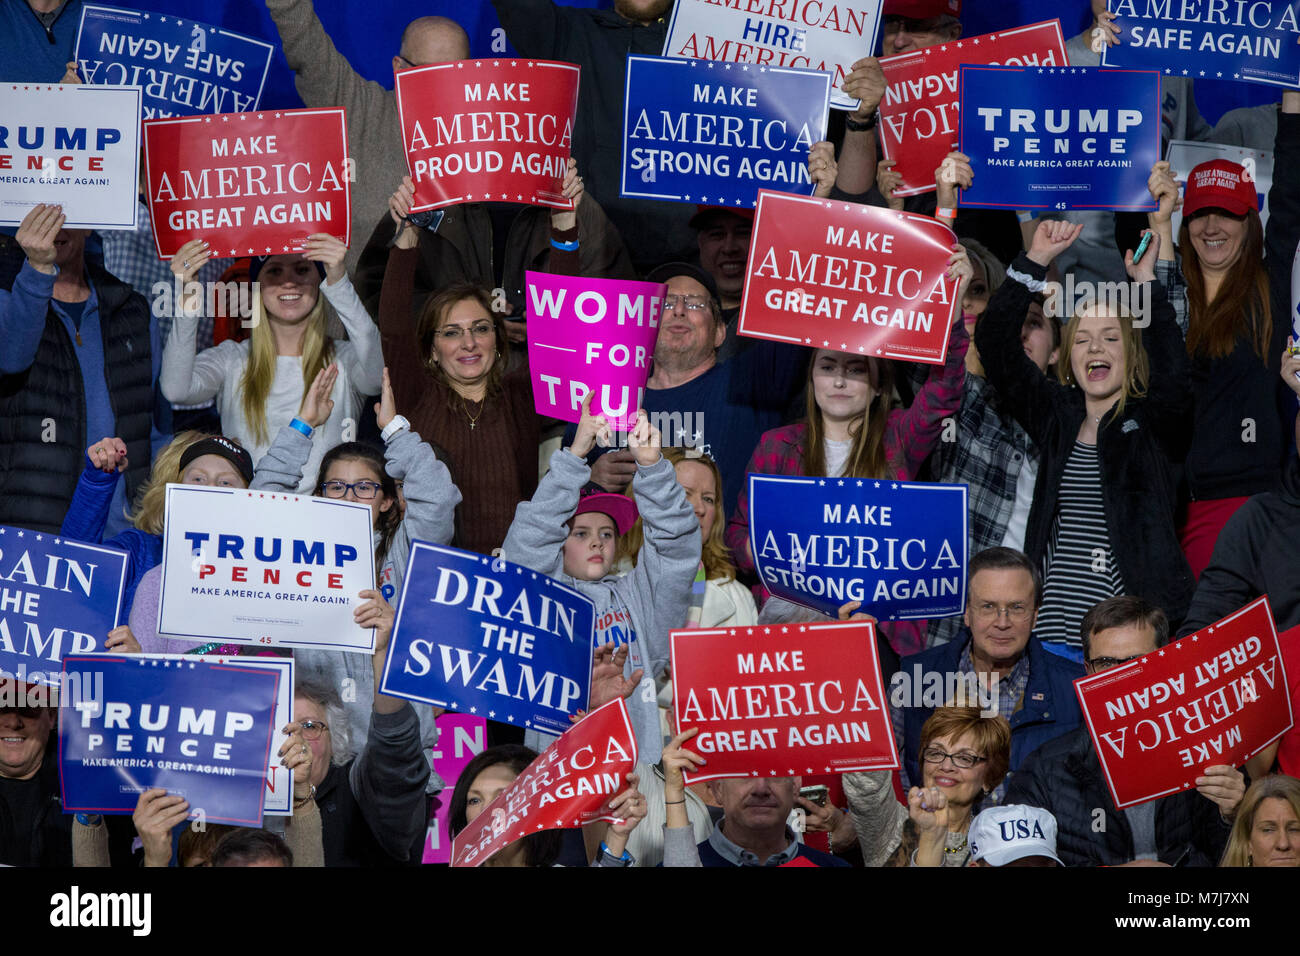 Moon Township, USA. 10th Mar, 2018. Supporters hold campaign signs during a Make American Great Rally at Atlantic Aviation in Moon Township, Pennsylvania on March 10th, 2018. Credit: Alex Edelman/CNP · NO WIRE SERVICE · Credit: Alex Edelman/Consolidated/dpa/Alamy Live News Stock Photo